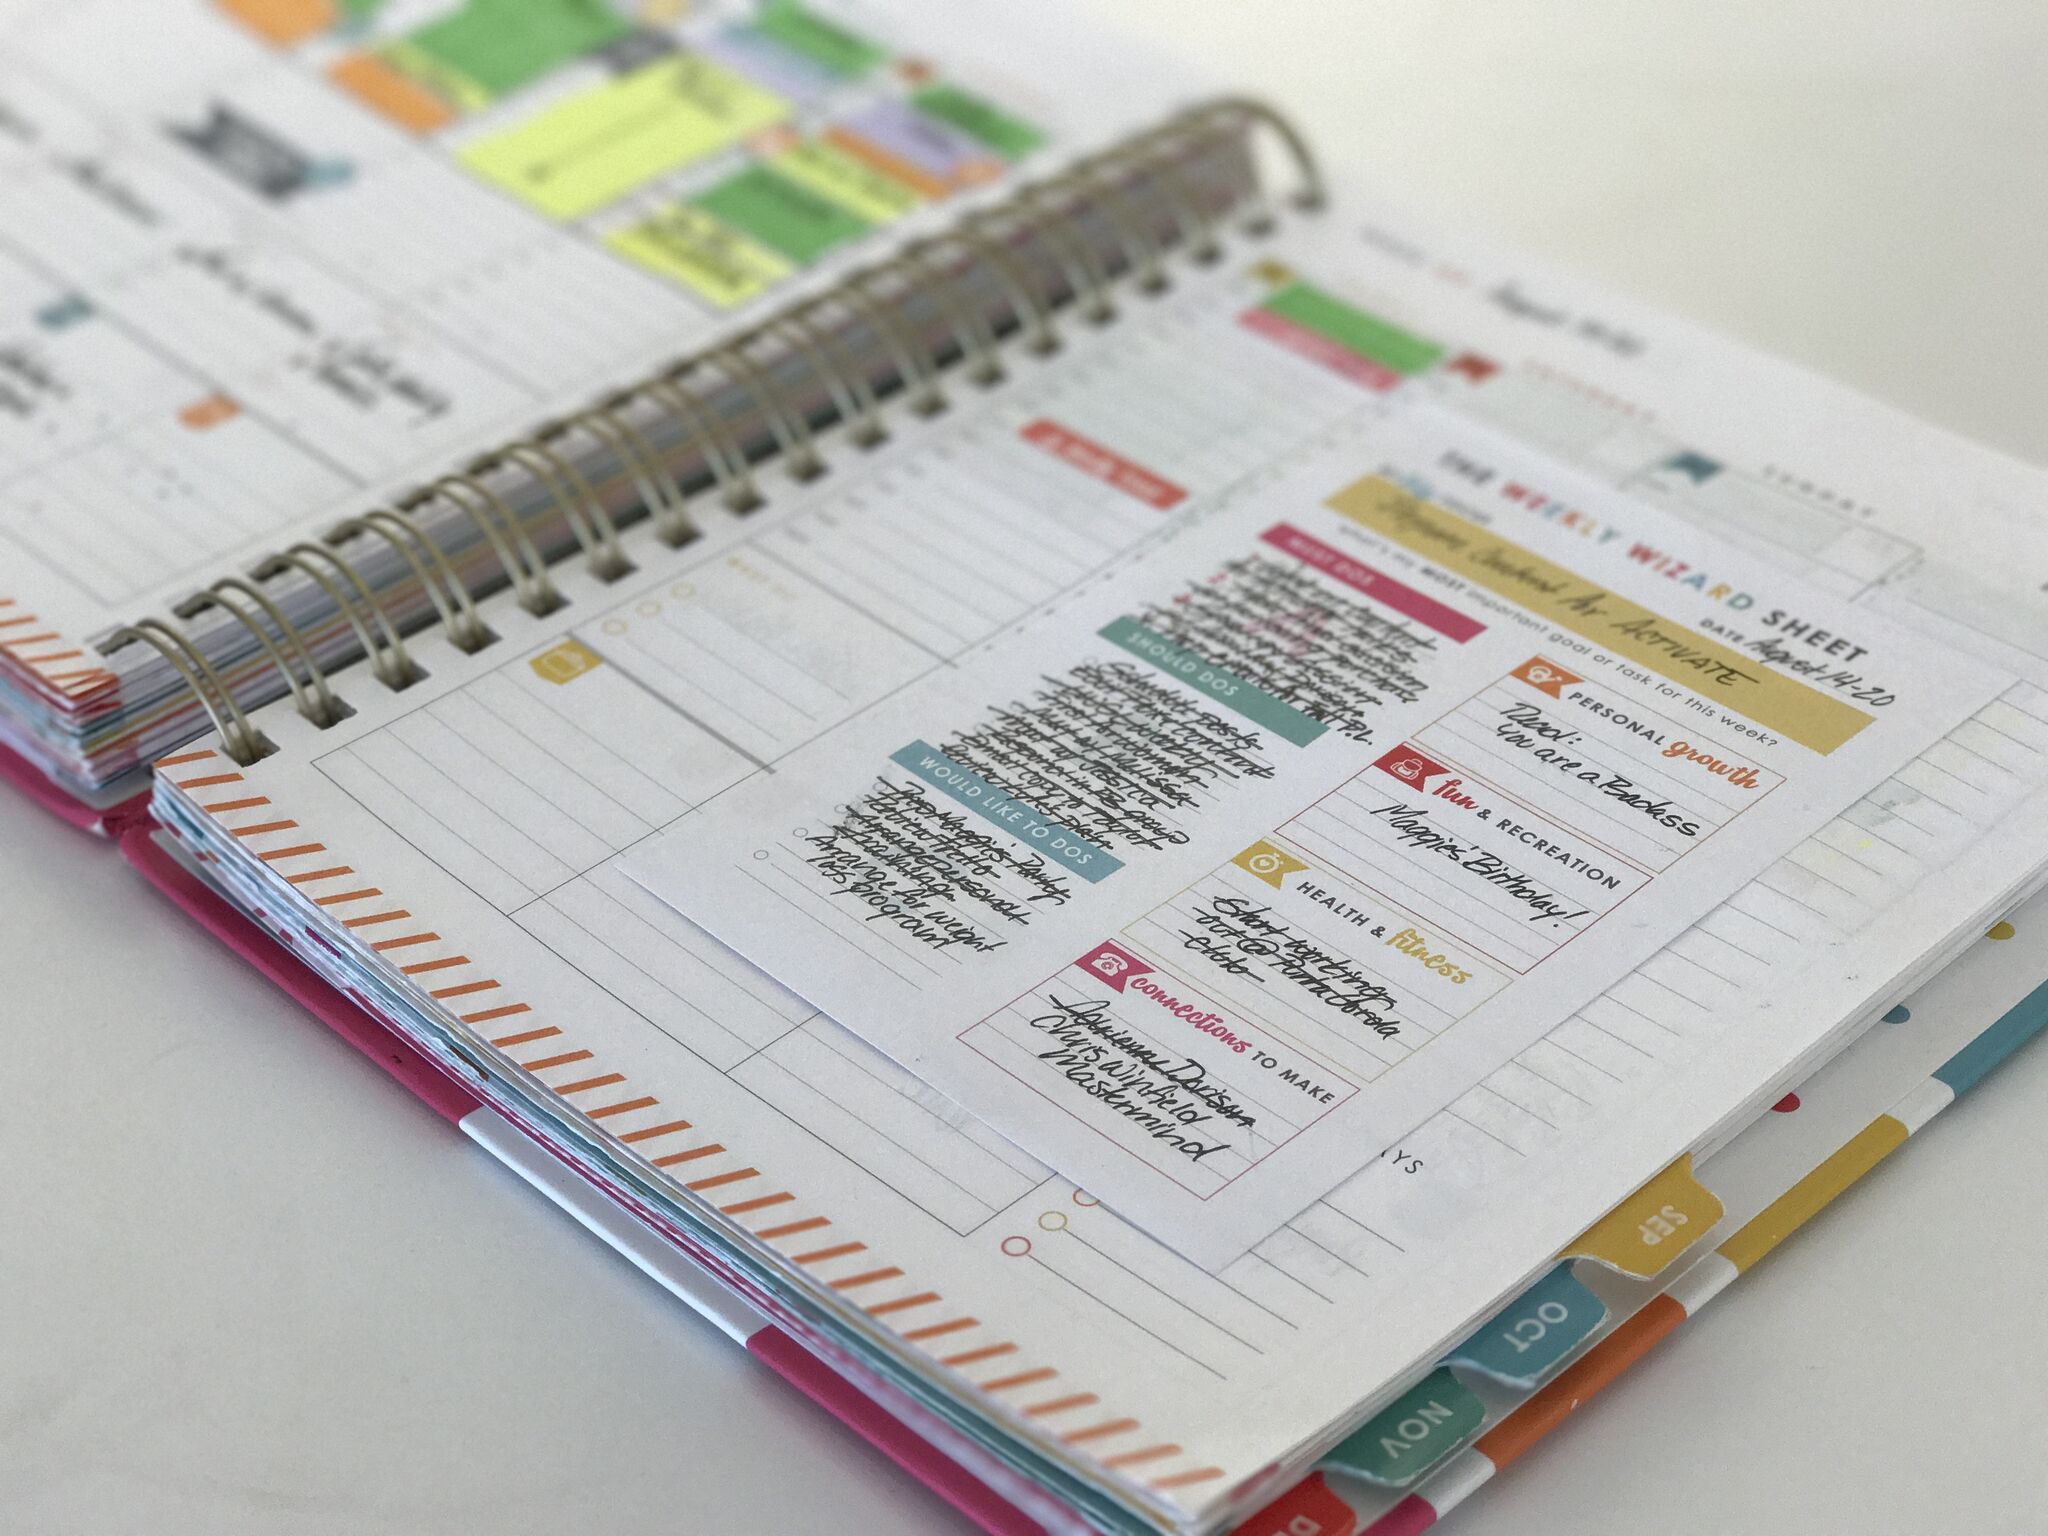 A planner is the perfect way to get your affairs in order - and it will totally help reduce your stress